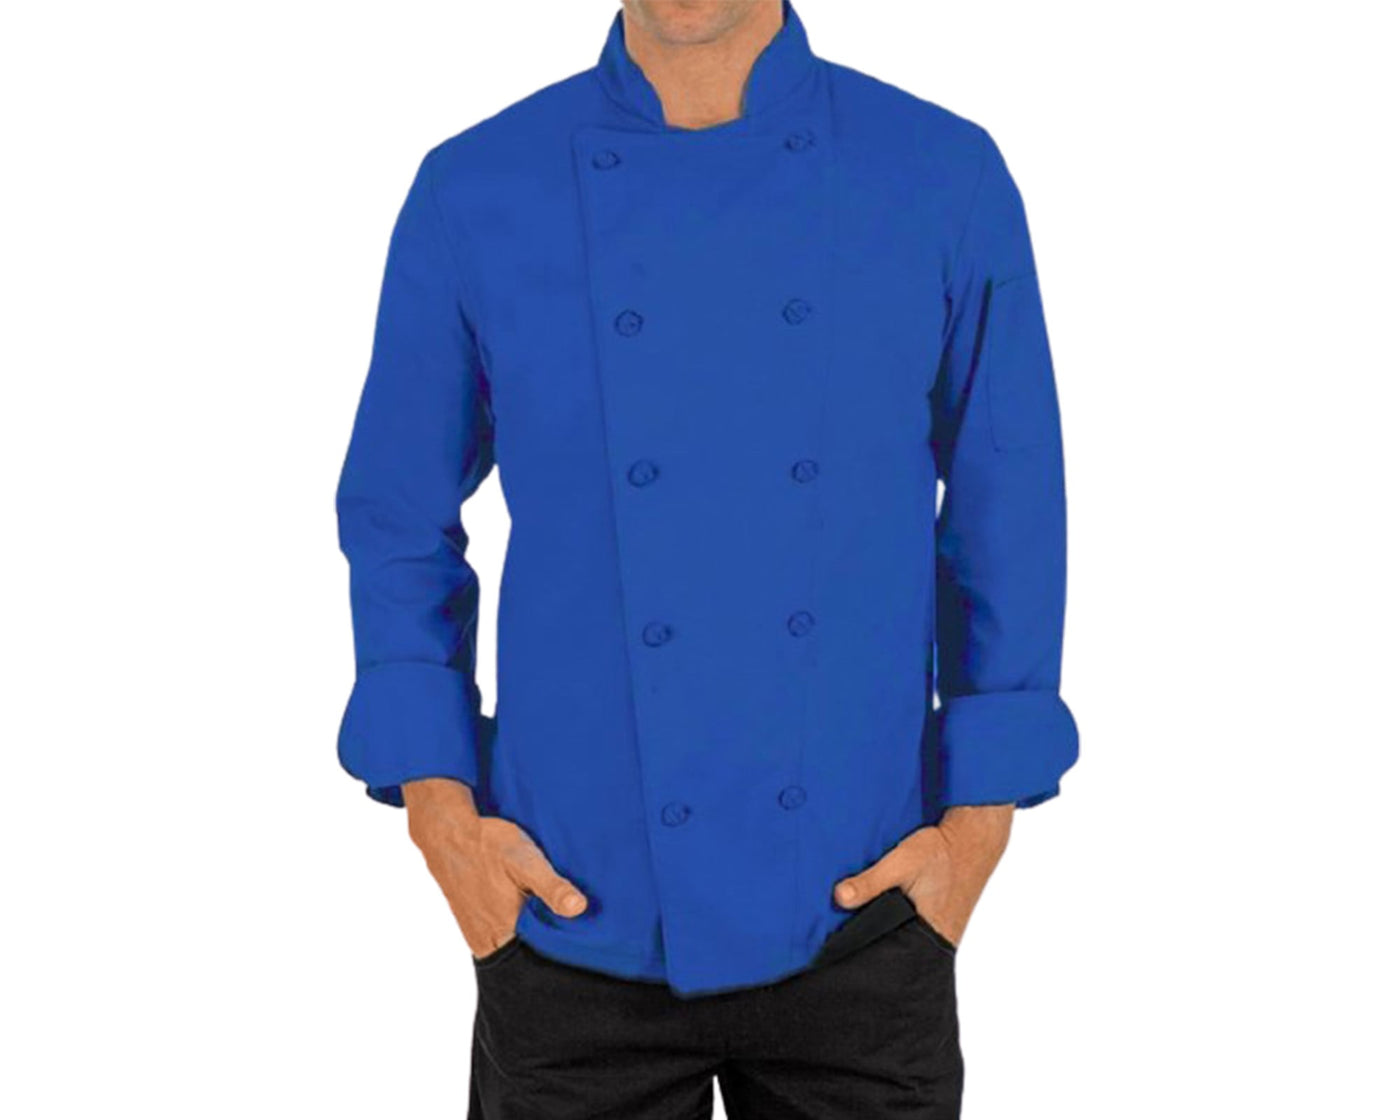 man wearing blue chef coat with solid buttons